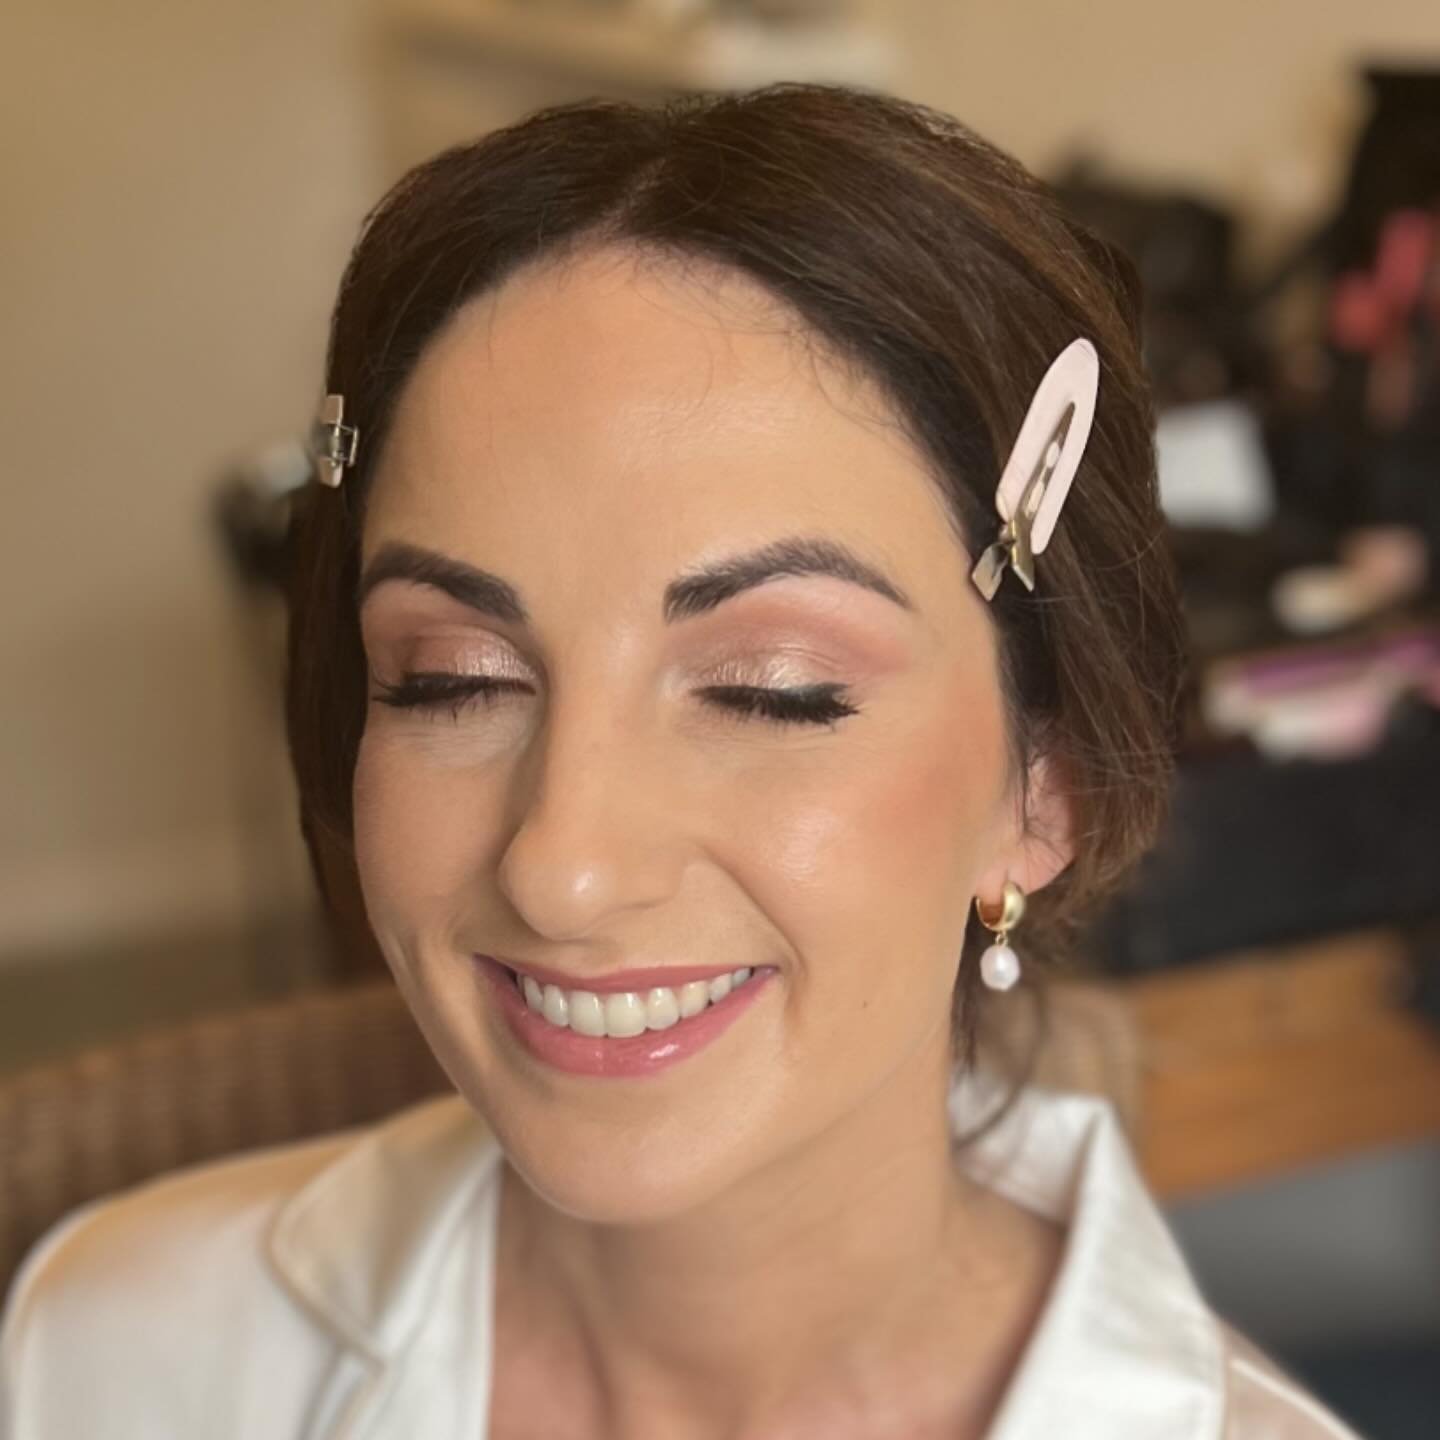 ✨Shannon ✨

I loved creating this soft glam makeup for Shannon. 🫶🏻
@shannondixon93 

Embrace the timeless beauty of soft glam makeup on your special day! I can create a look that enhances your natural features and radiates elegance. From a soft, de